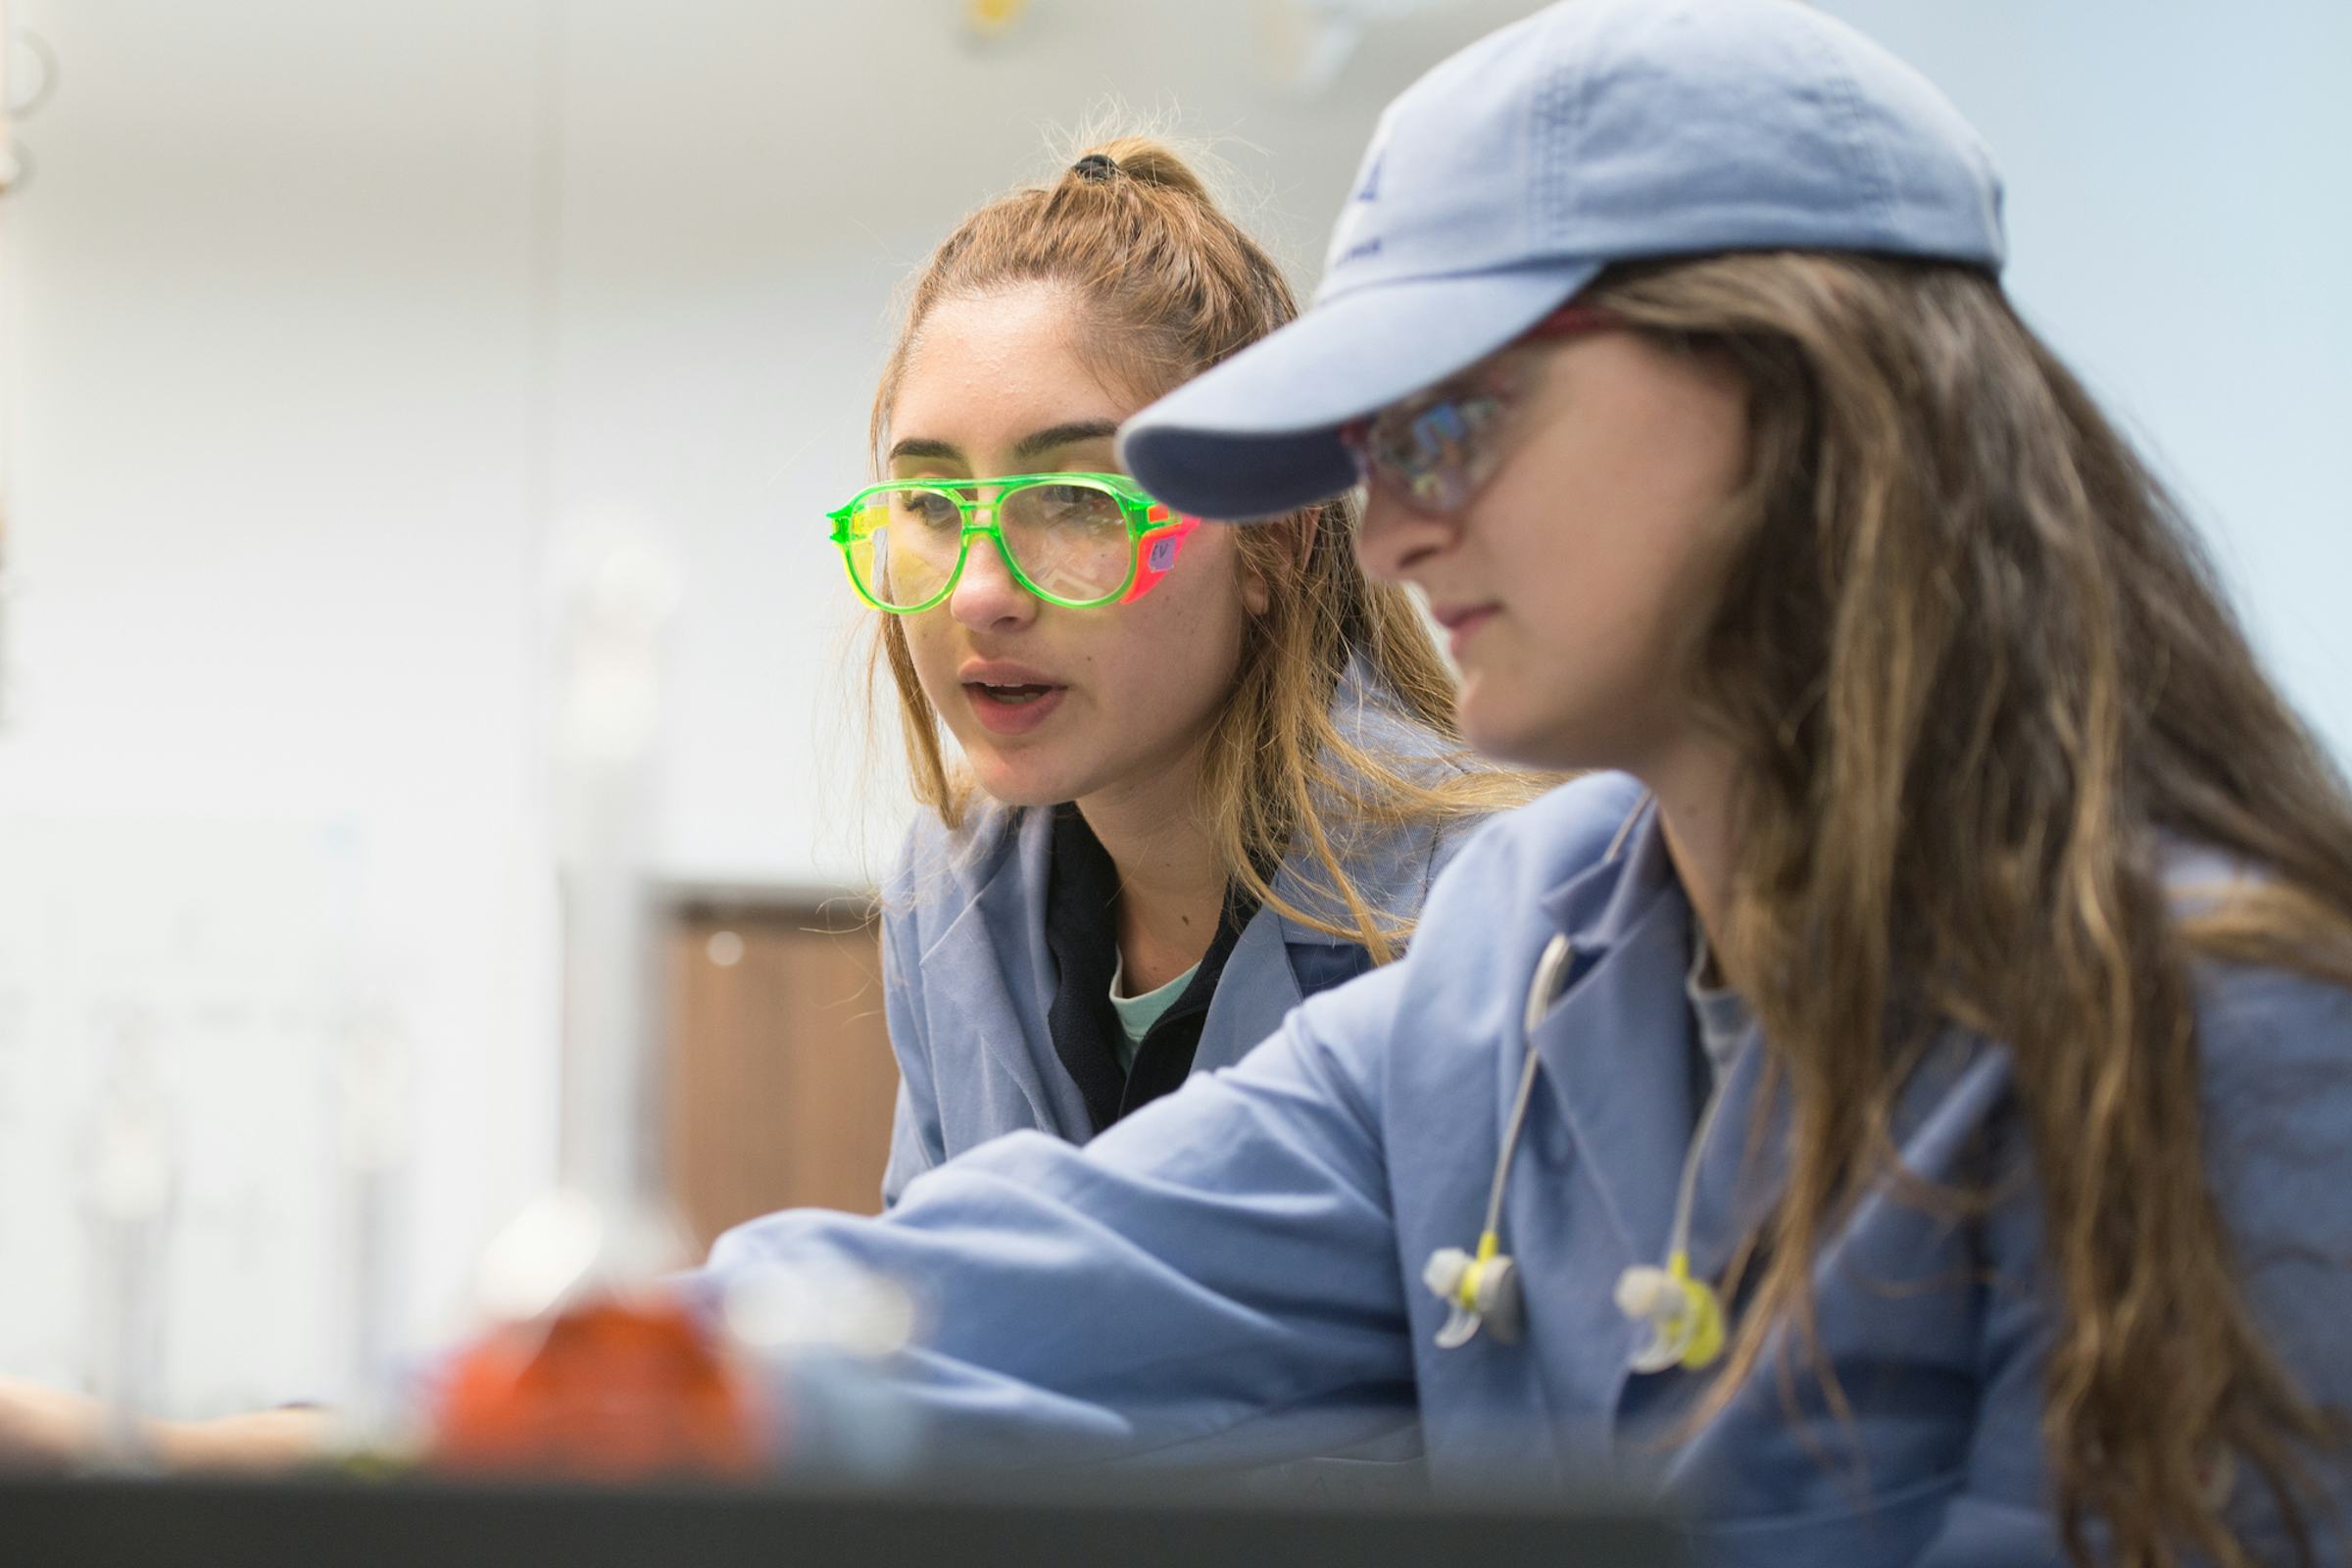 FRI researchers in a lab wearing goggles point to a finding